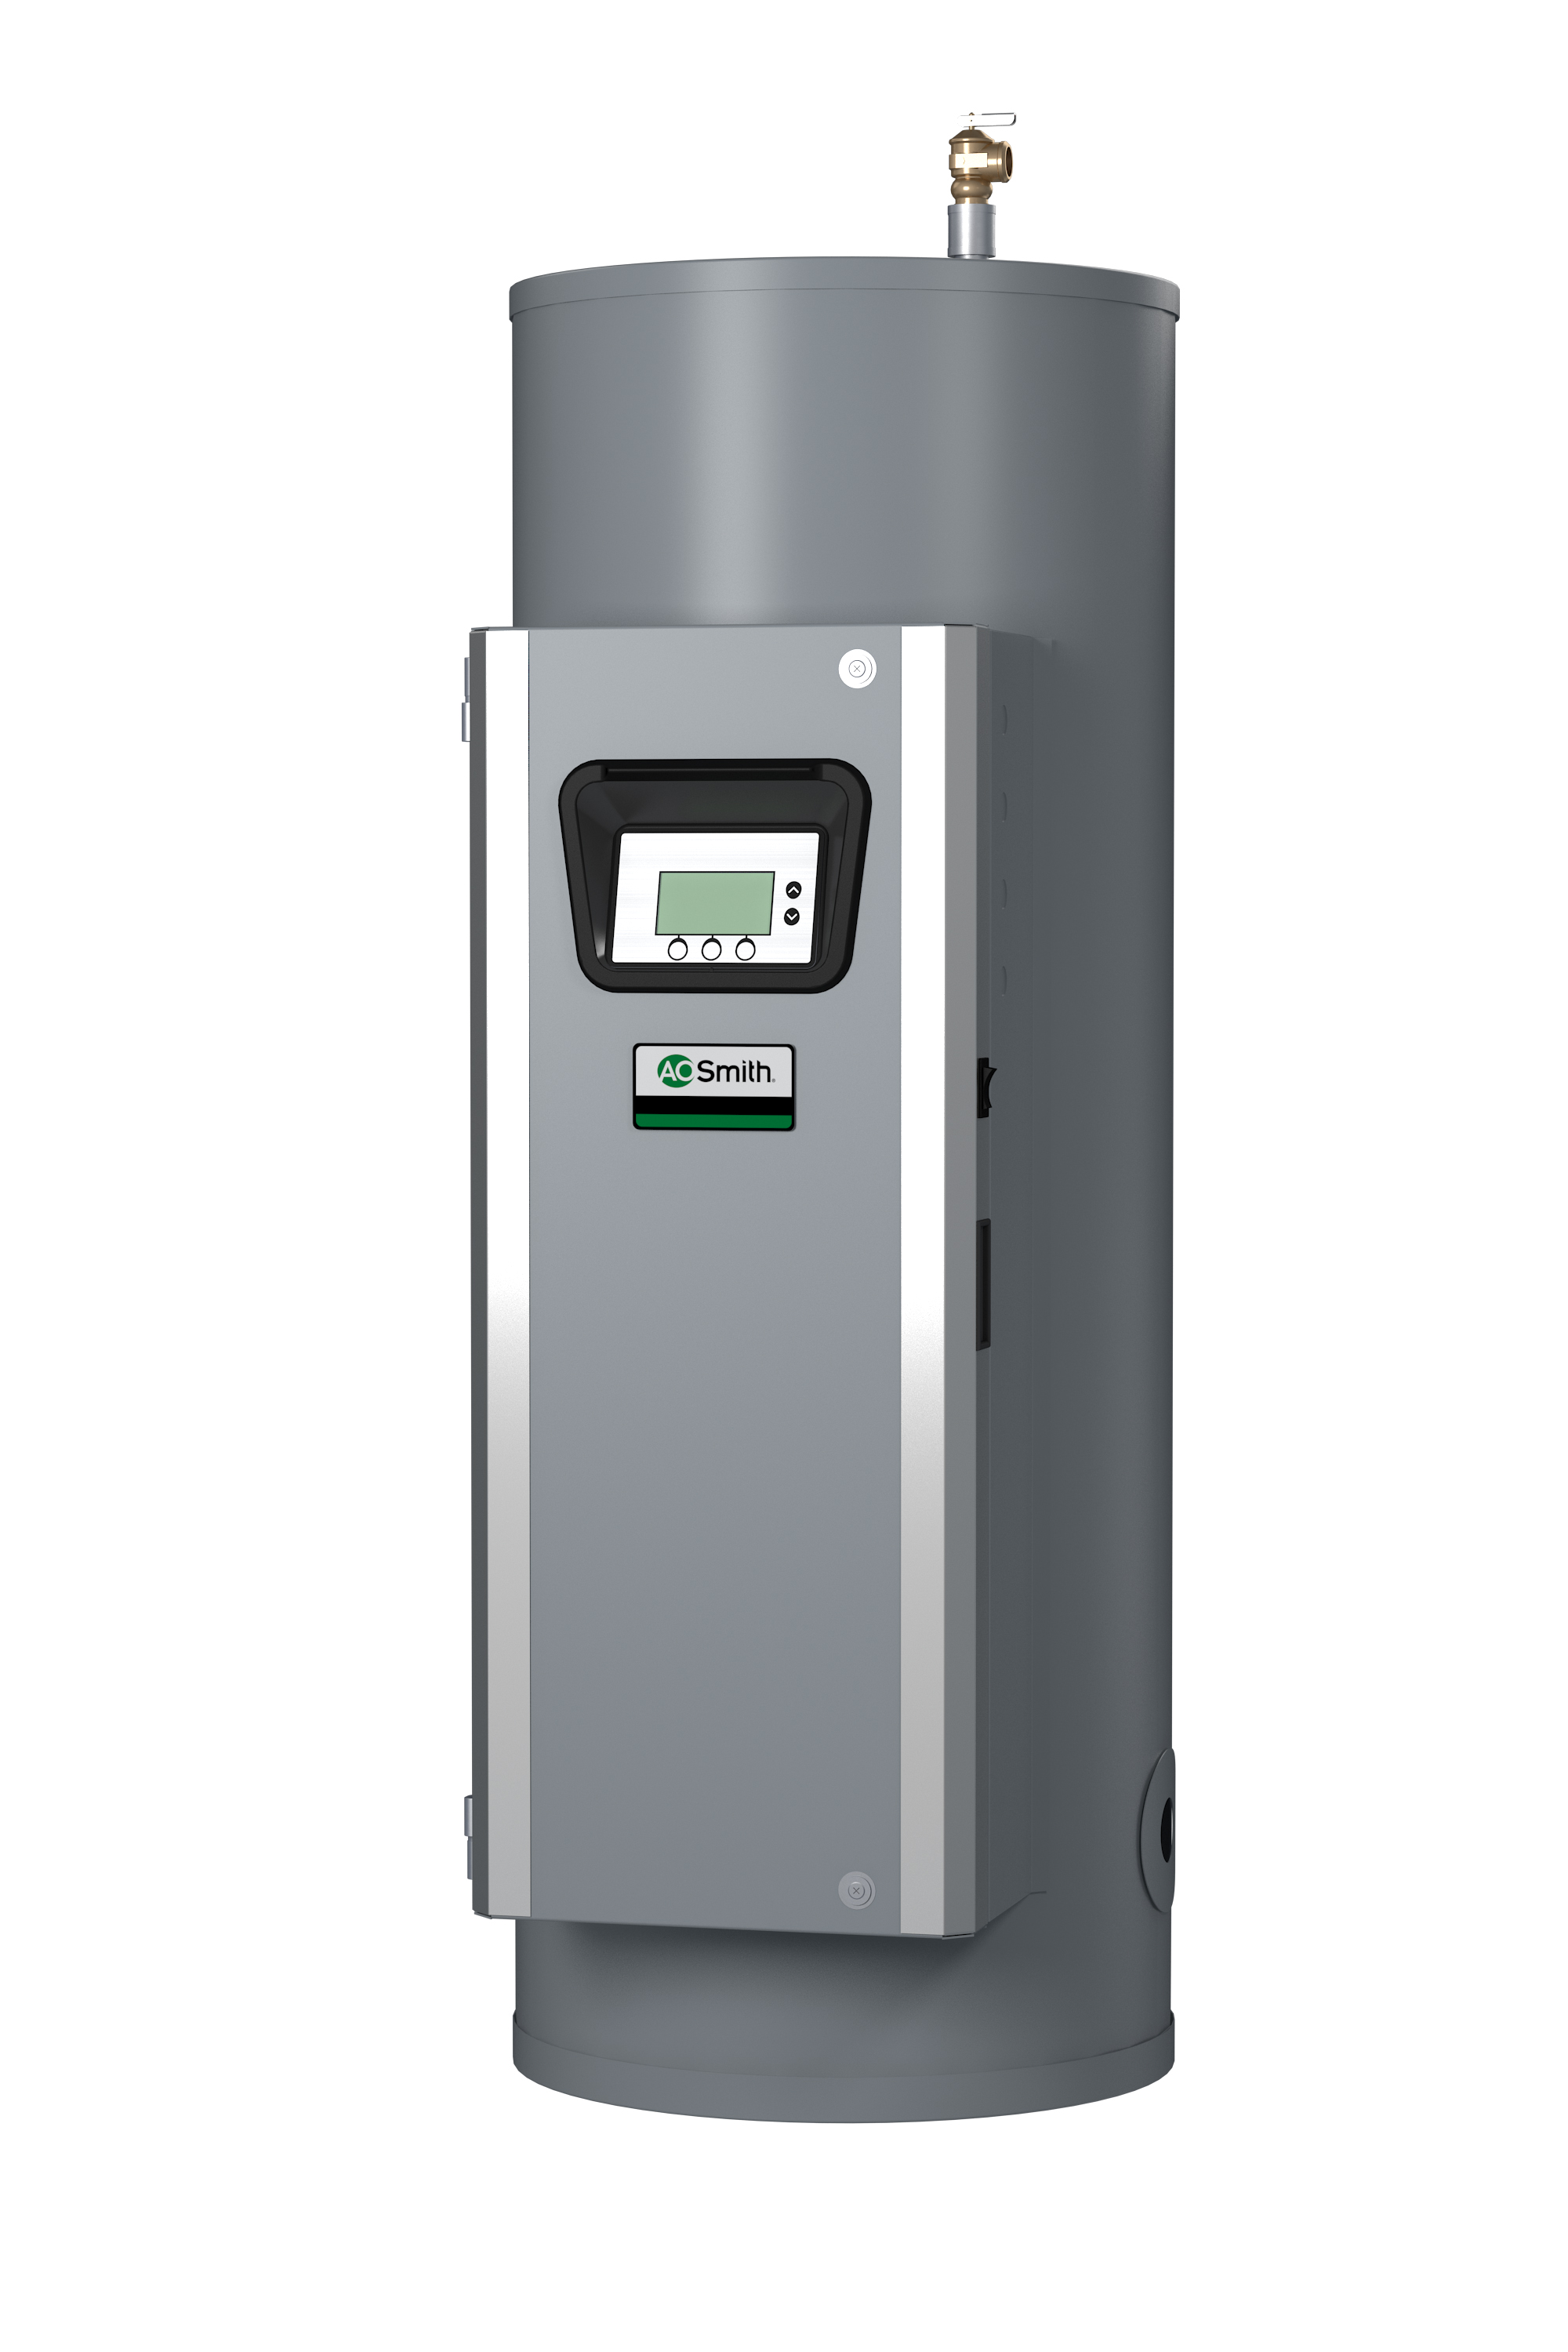 AO SMITH DSE-50A-45, 50 GALLONS, 45KW, 240 VOLT, 187.5 AMPS, 1 PHASE, 3 ELEMENTS, ASME CUSTOM Xi SERIES HEAVY DUTY COMMERCIAL ELECTRIC WATER HEATER